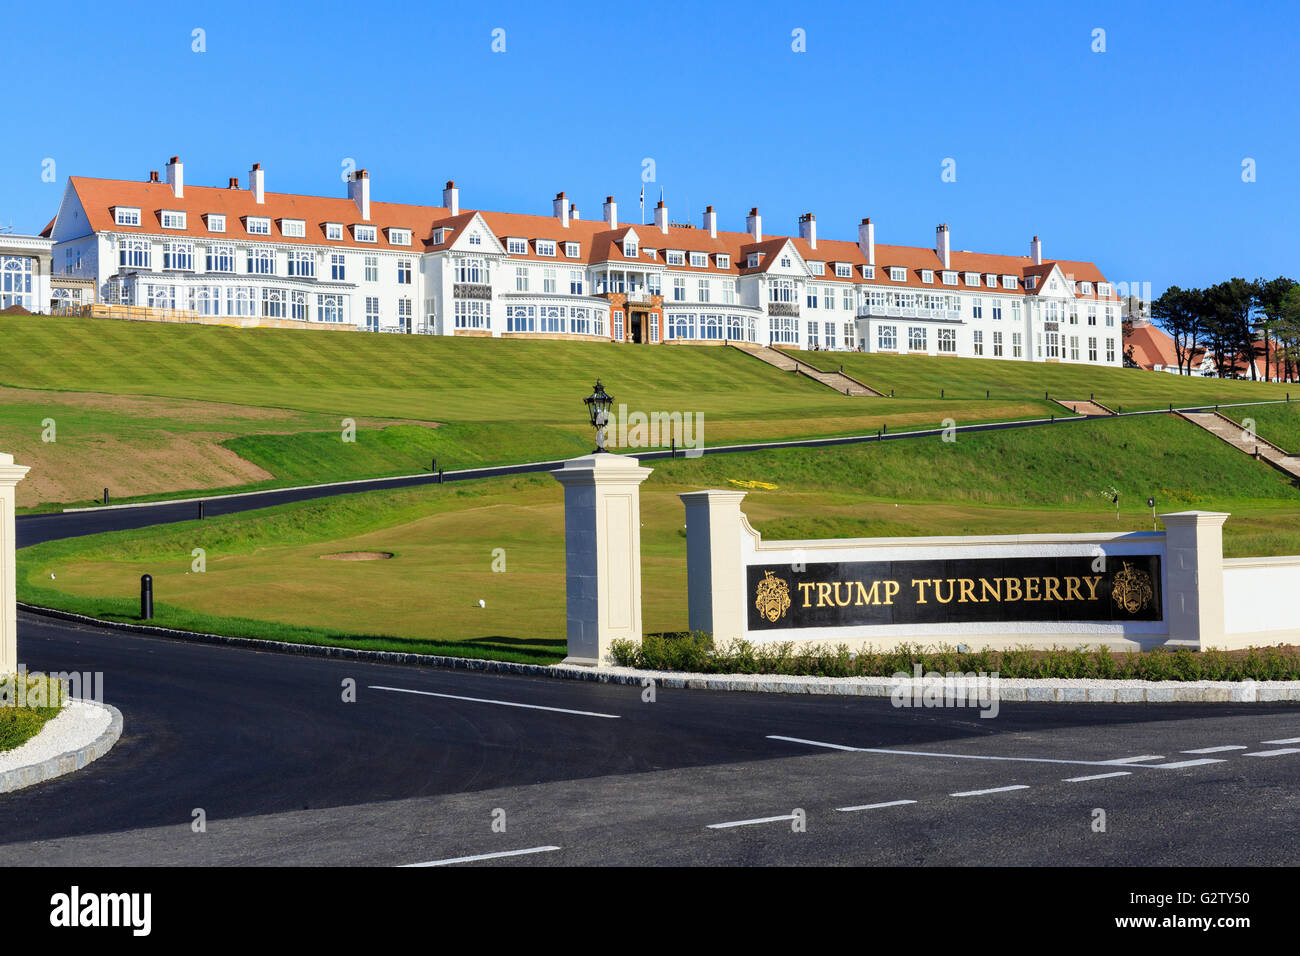 Trump hotel Turnberry, Ayrshire, Scotland, UK Banque D'Images